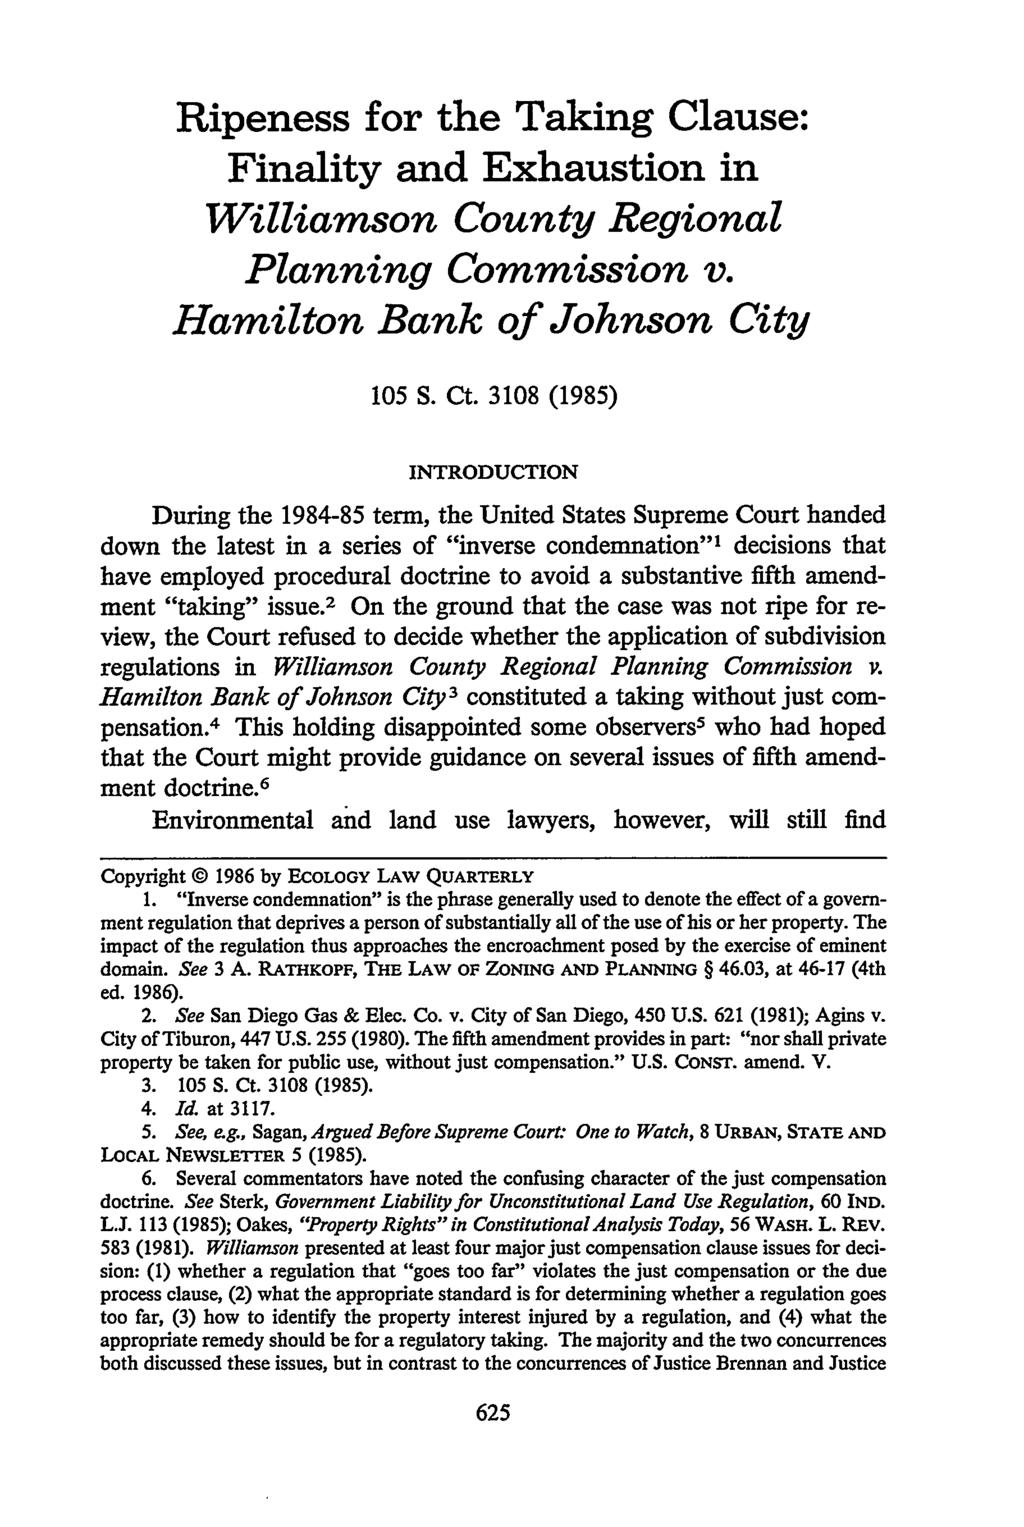 Ripeness for the Taking Clause: Finality and Exhaustion in Williamson County Regional Planning Commission v. Hamilton Bank of Johnson City 105 S. Ct.